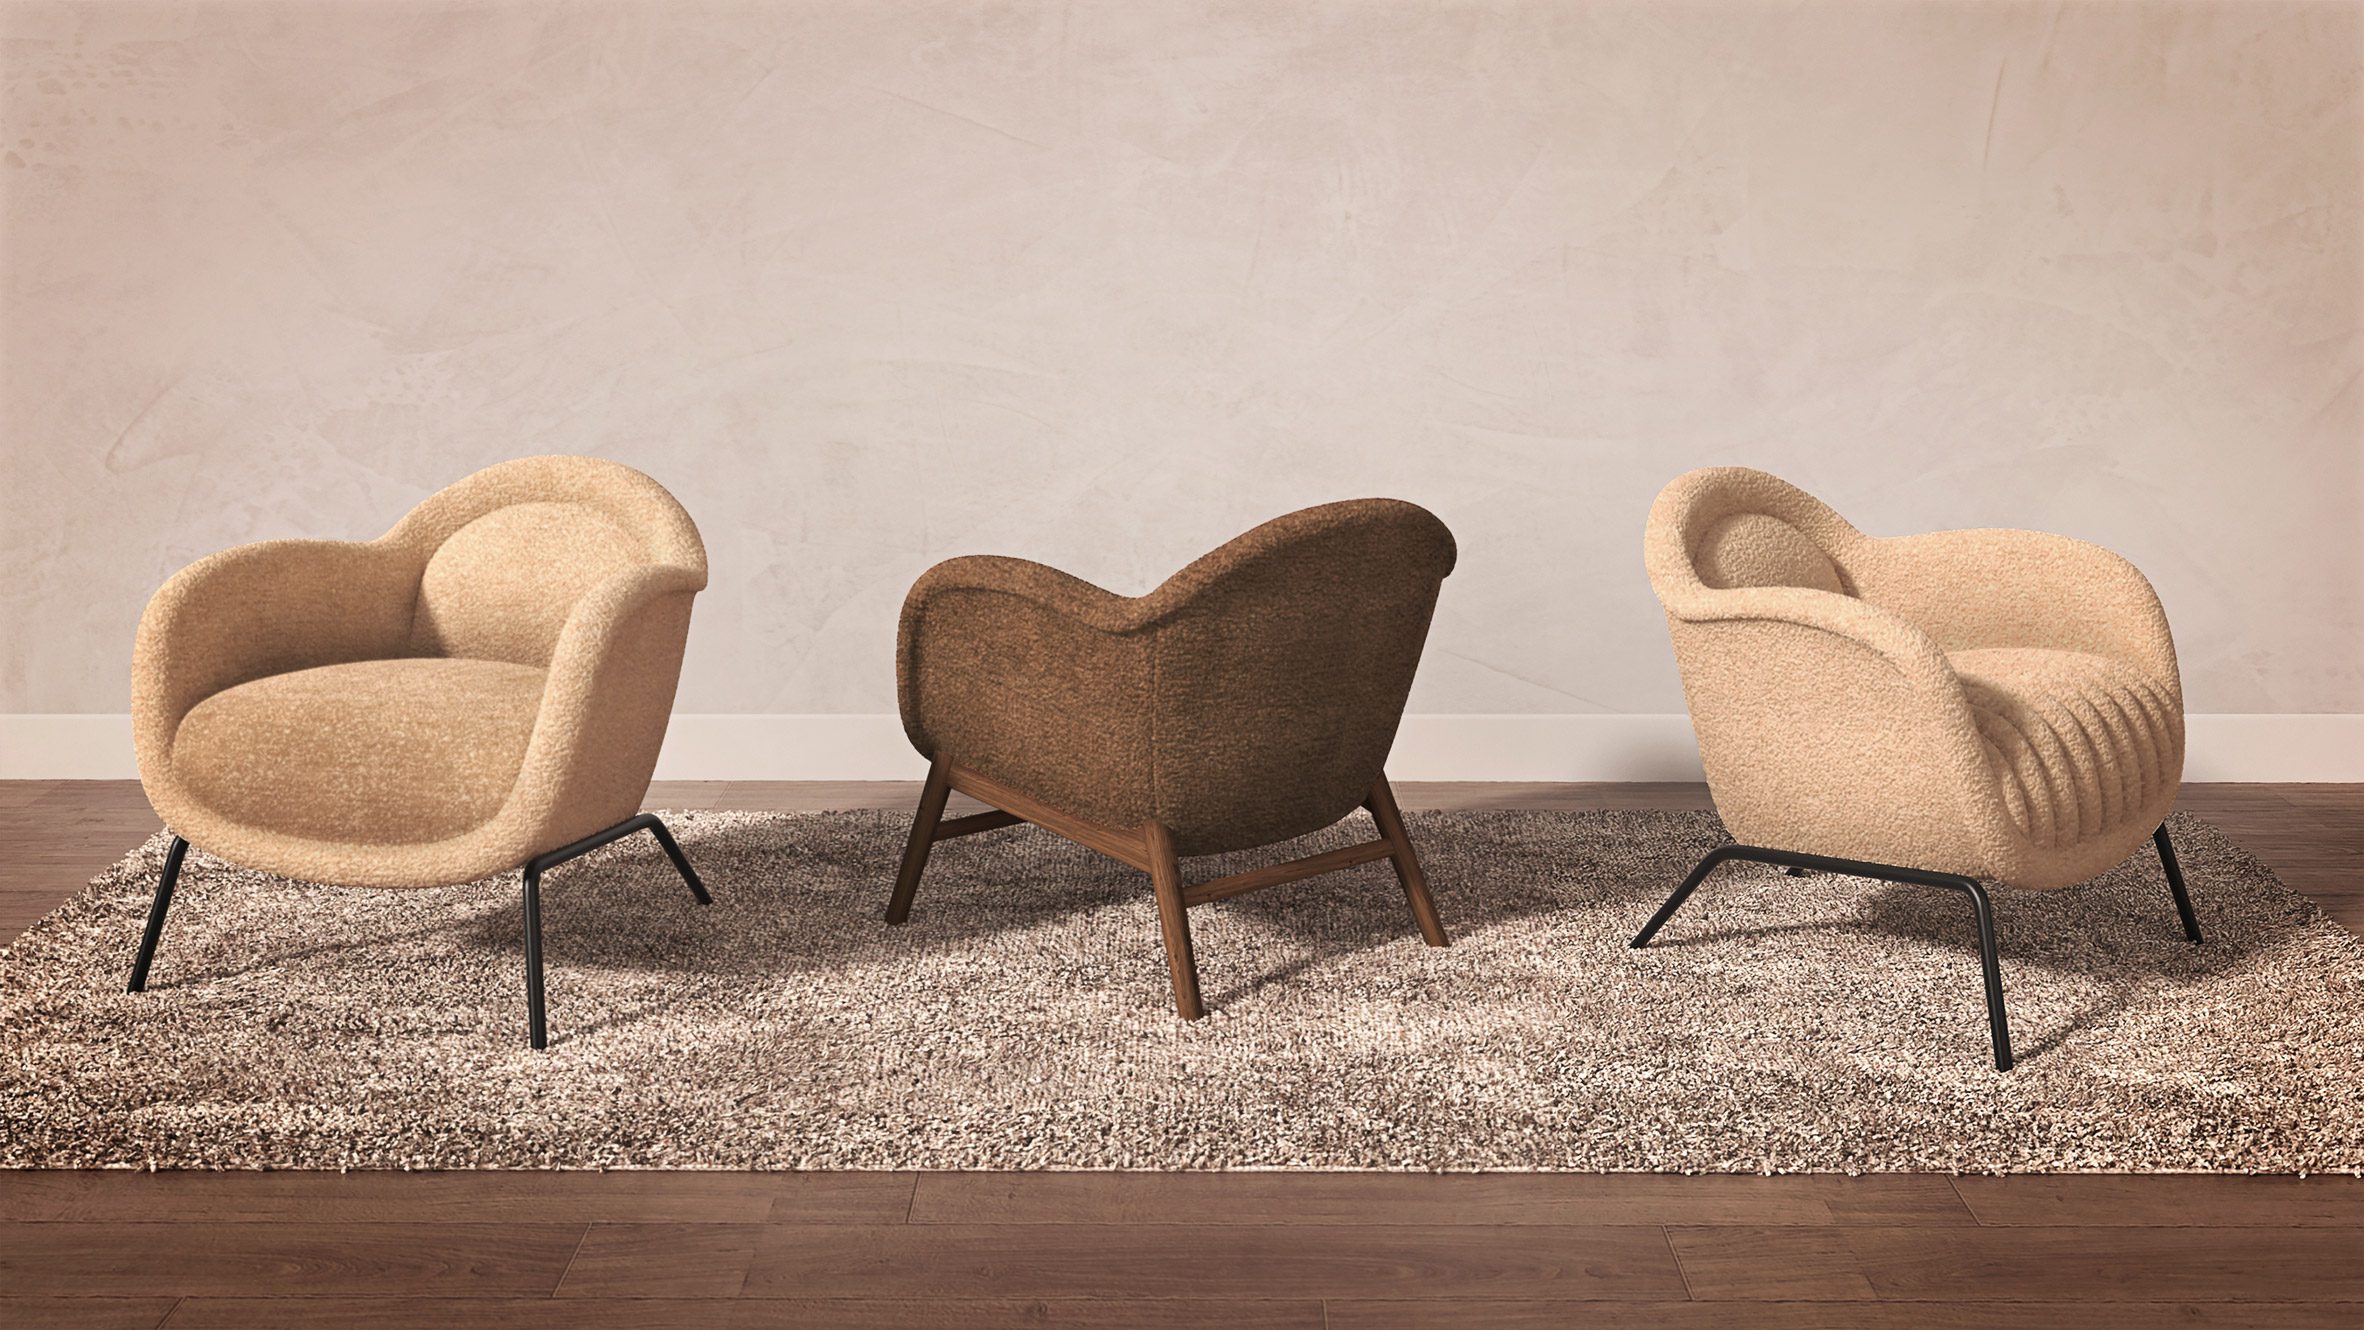 Chairs upholstered in Dolly Recycled fabric by Søren Møller for TexStyle